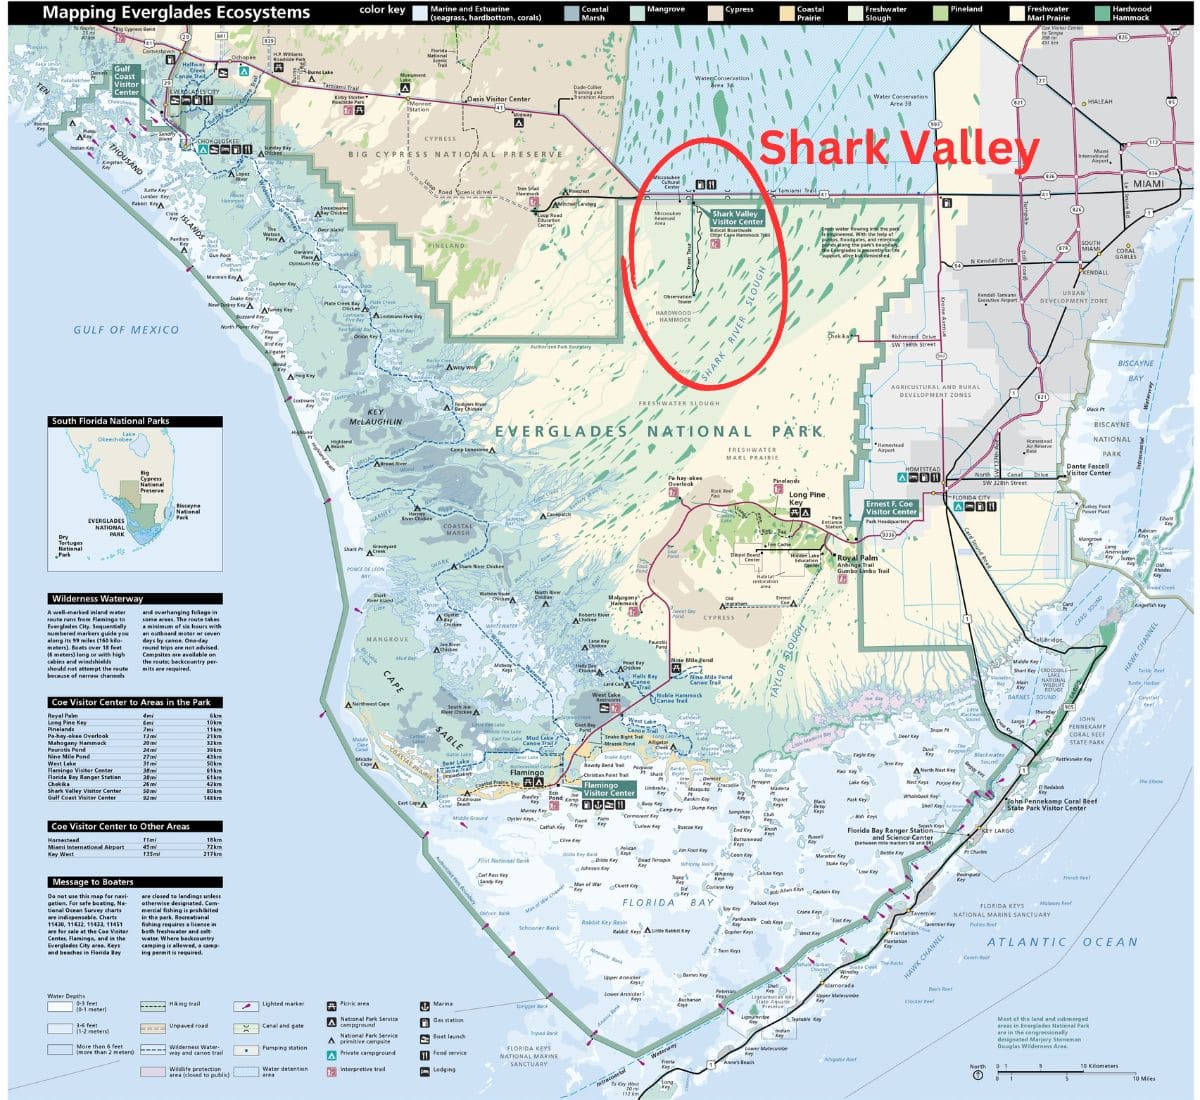 Map of Everglades National Park With Location of Shark Valley